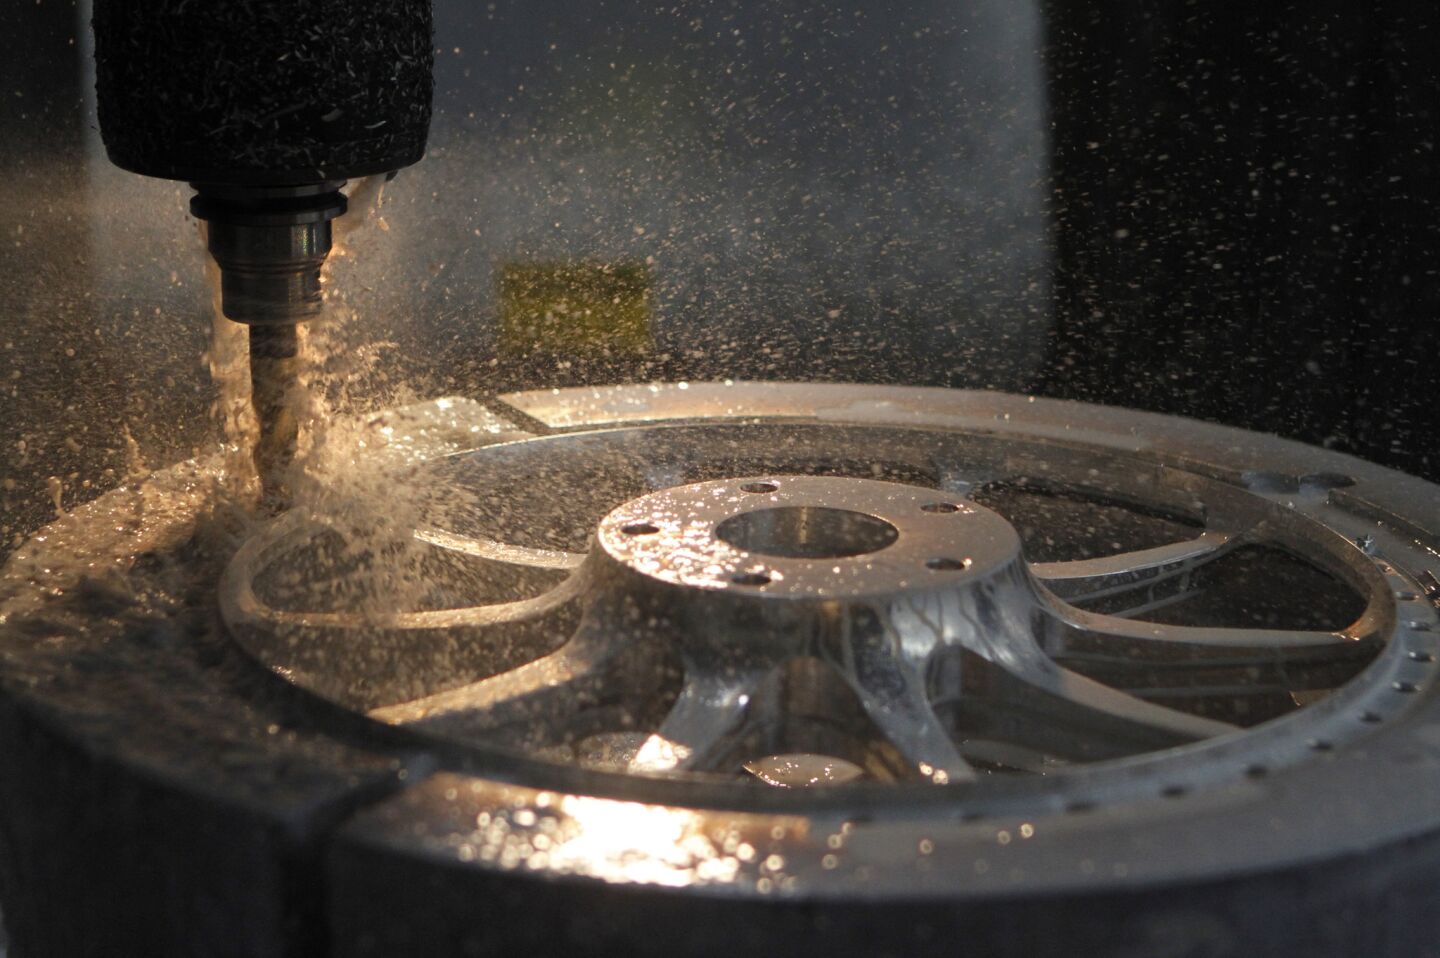 Cooling liquid splashes around as an automated cutter shapes an aluminum wheel at HRE Performance Wheels.